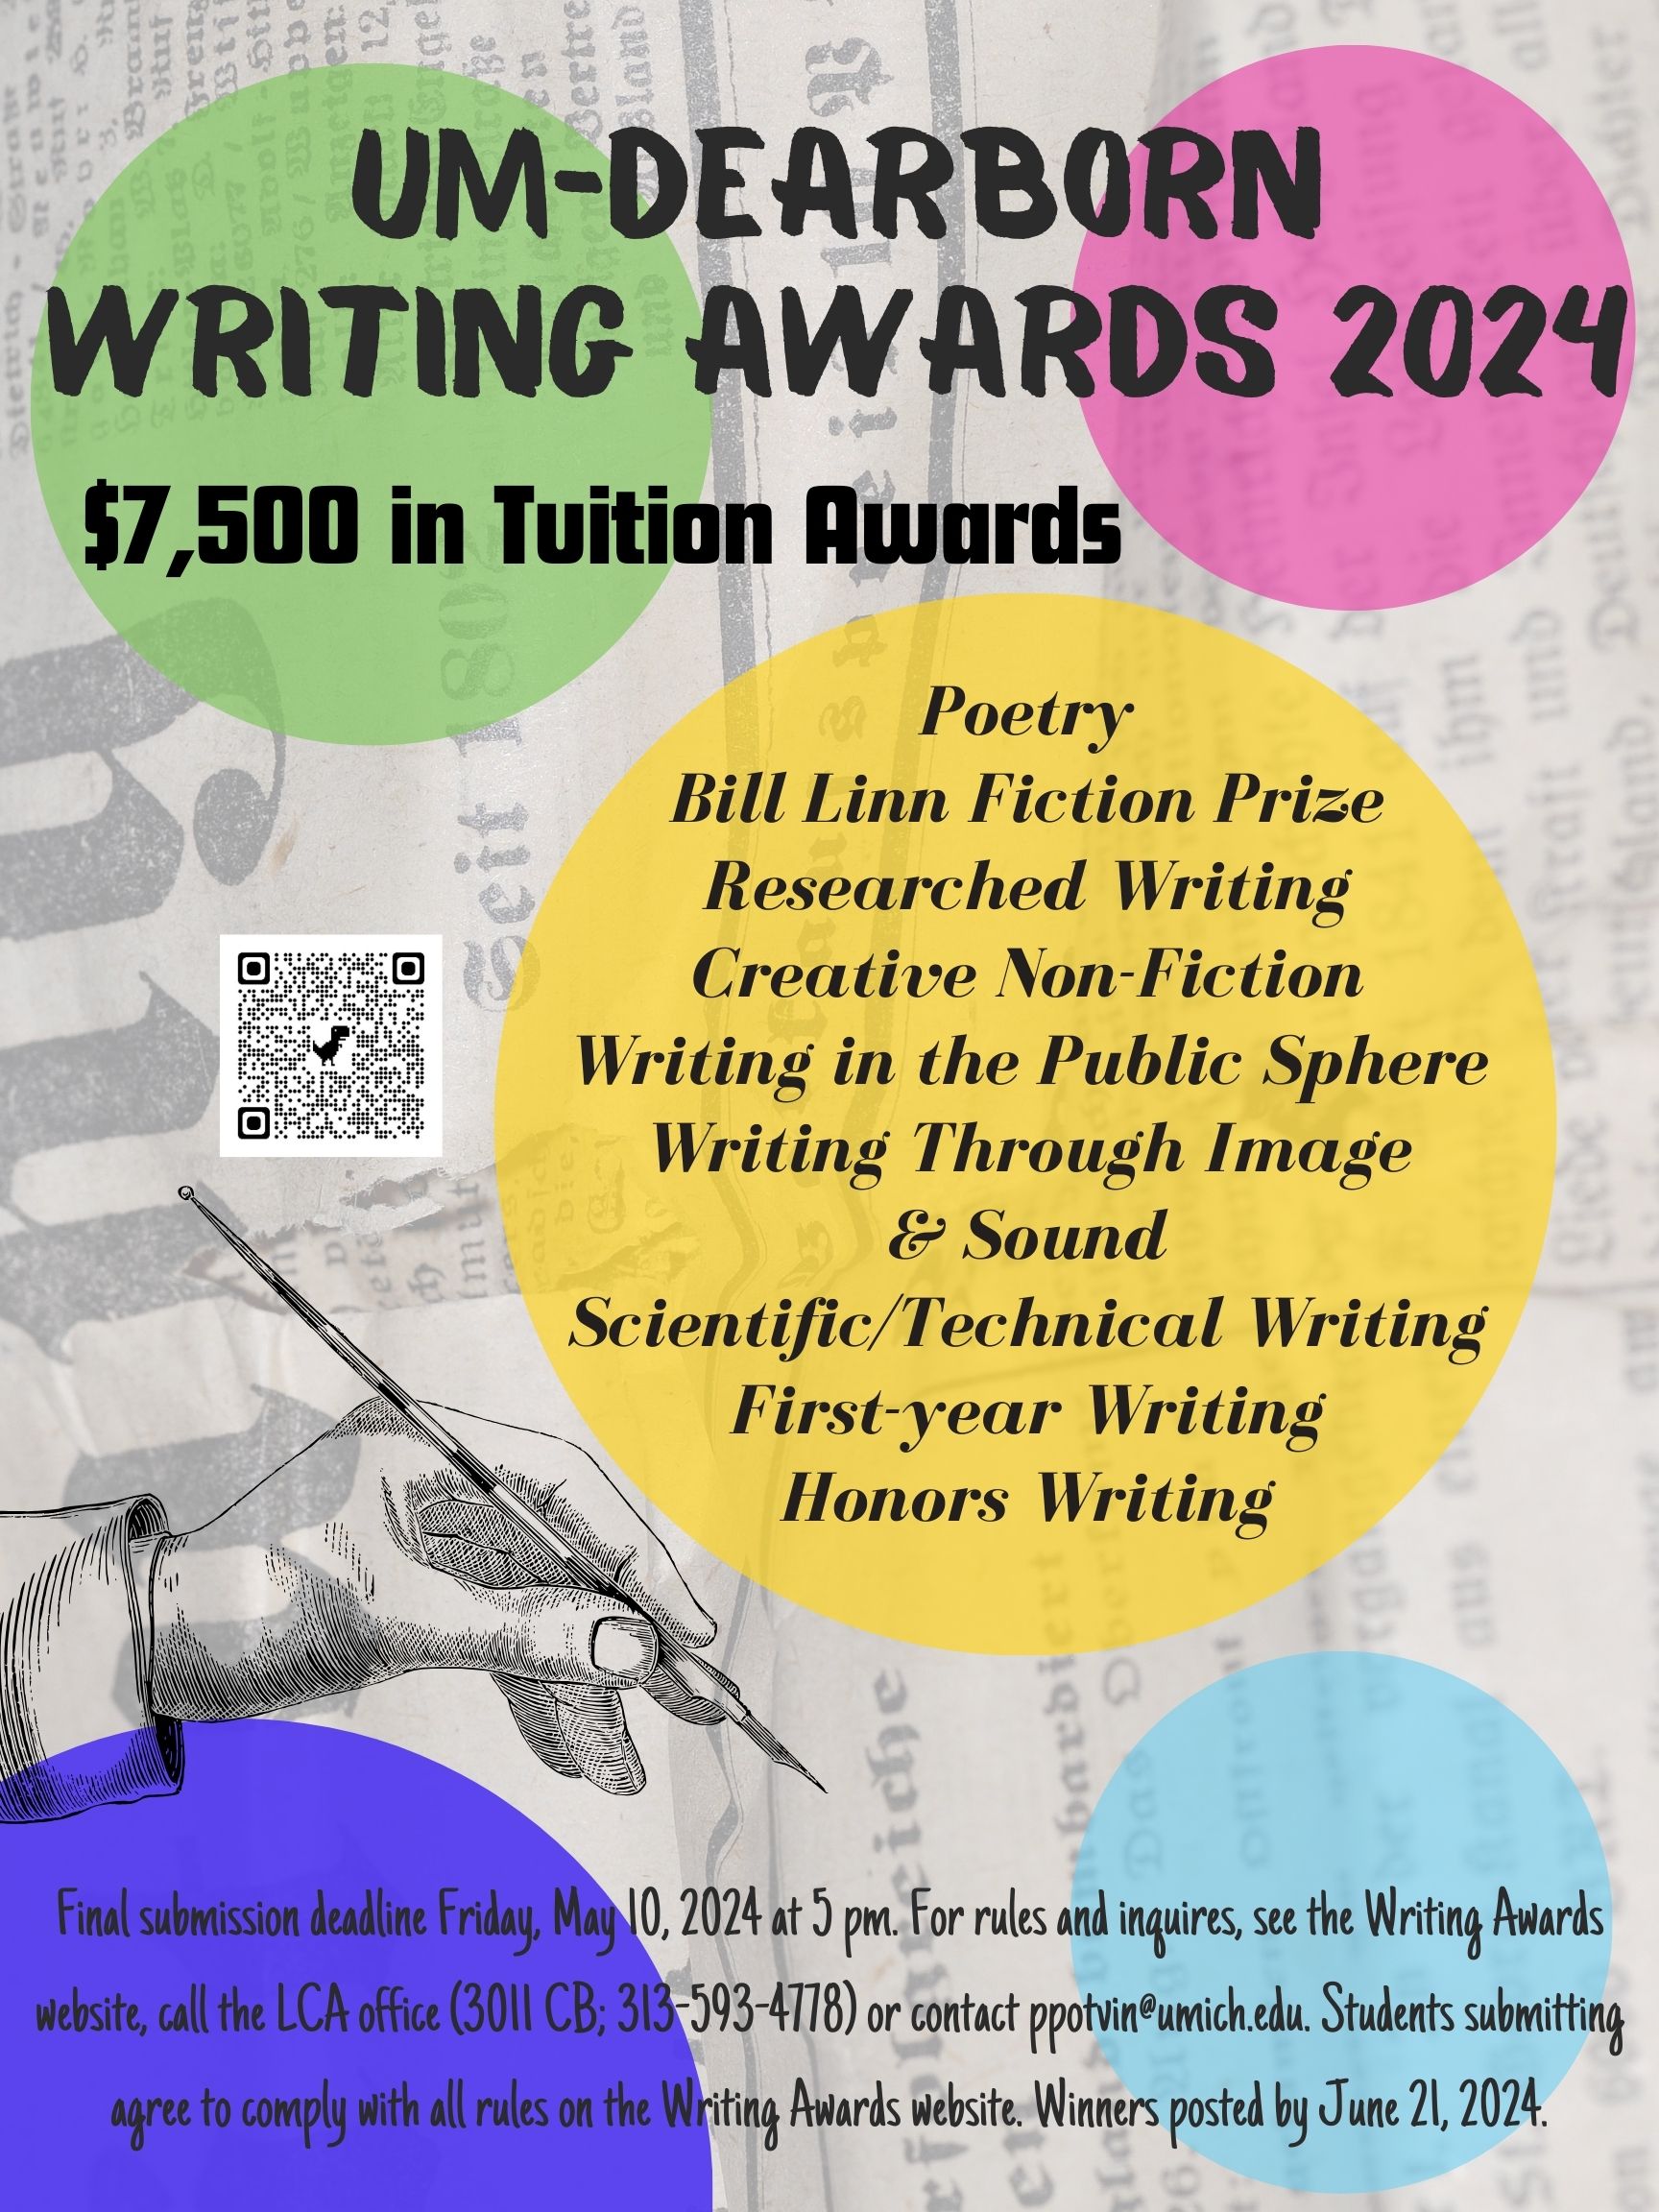 UM-Dearborn Writing Awards 2024. $7,500 in Tutition Awards. Final submission deadline Friday, May 10, 2024 at 5 pm. For rules and inquires, see the Writing Awards website, call the LCA office (3011 CB; 313-593-4778) or contact ppotvin@umich.edu. Students submitting agree to comply with all rules on the Writing Awards website. Winners posted by June 21, 2024.